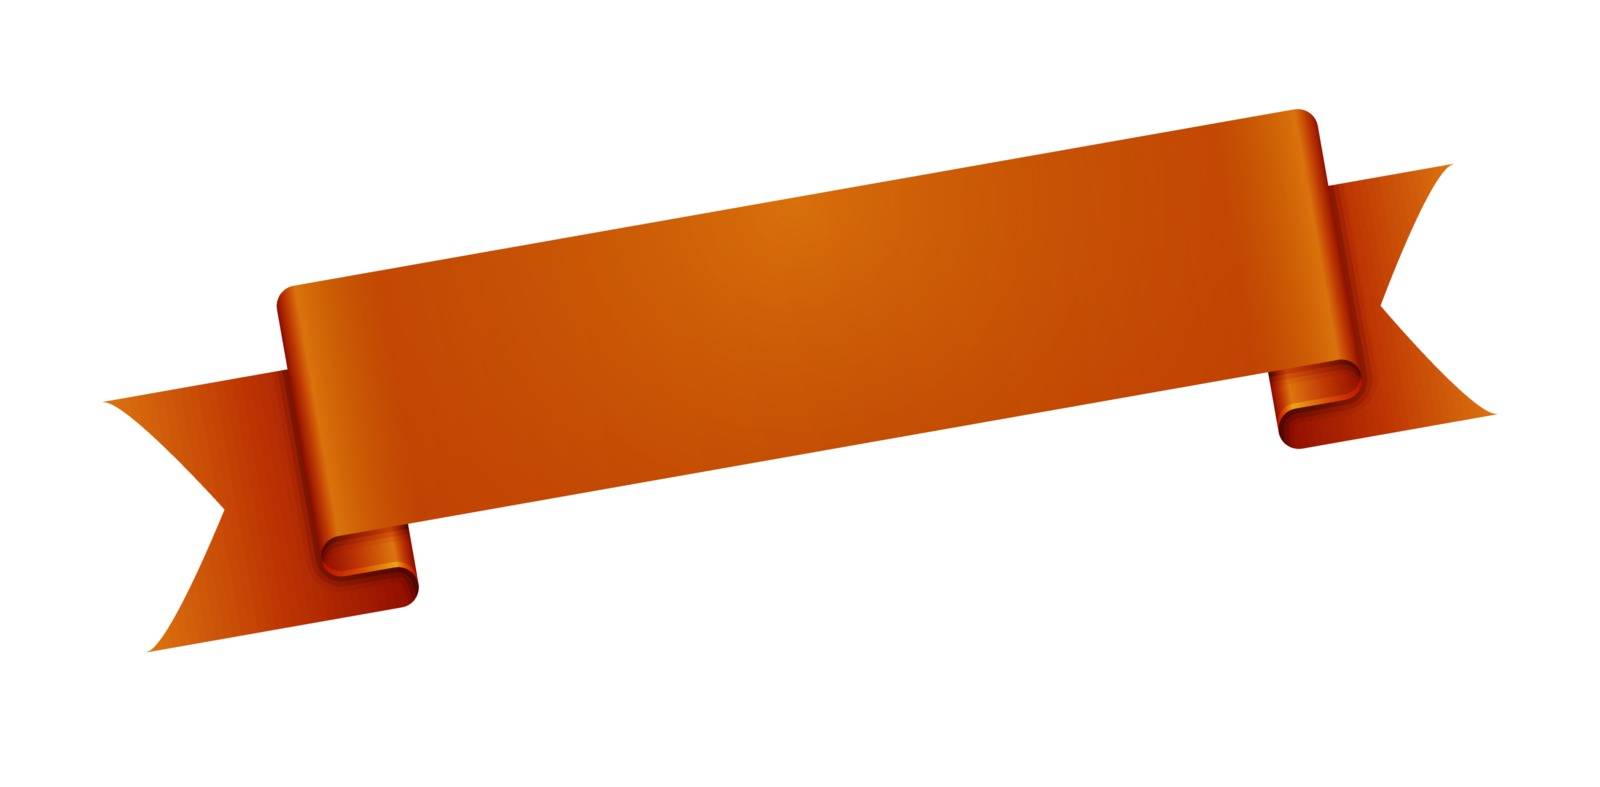 The dark orange blank ribbon ready for your text